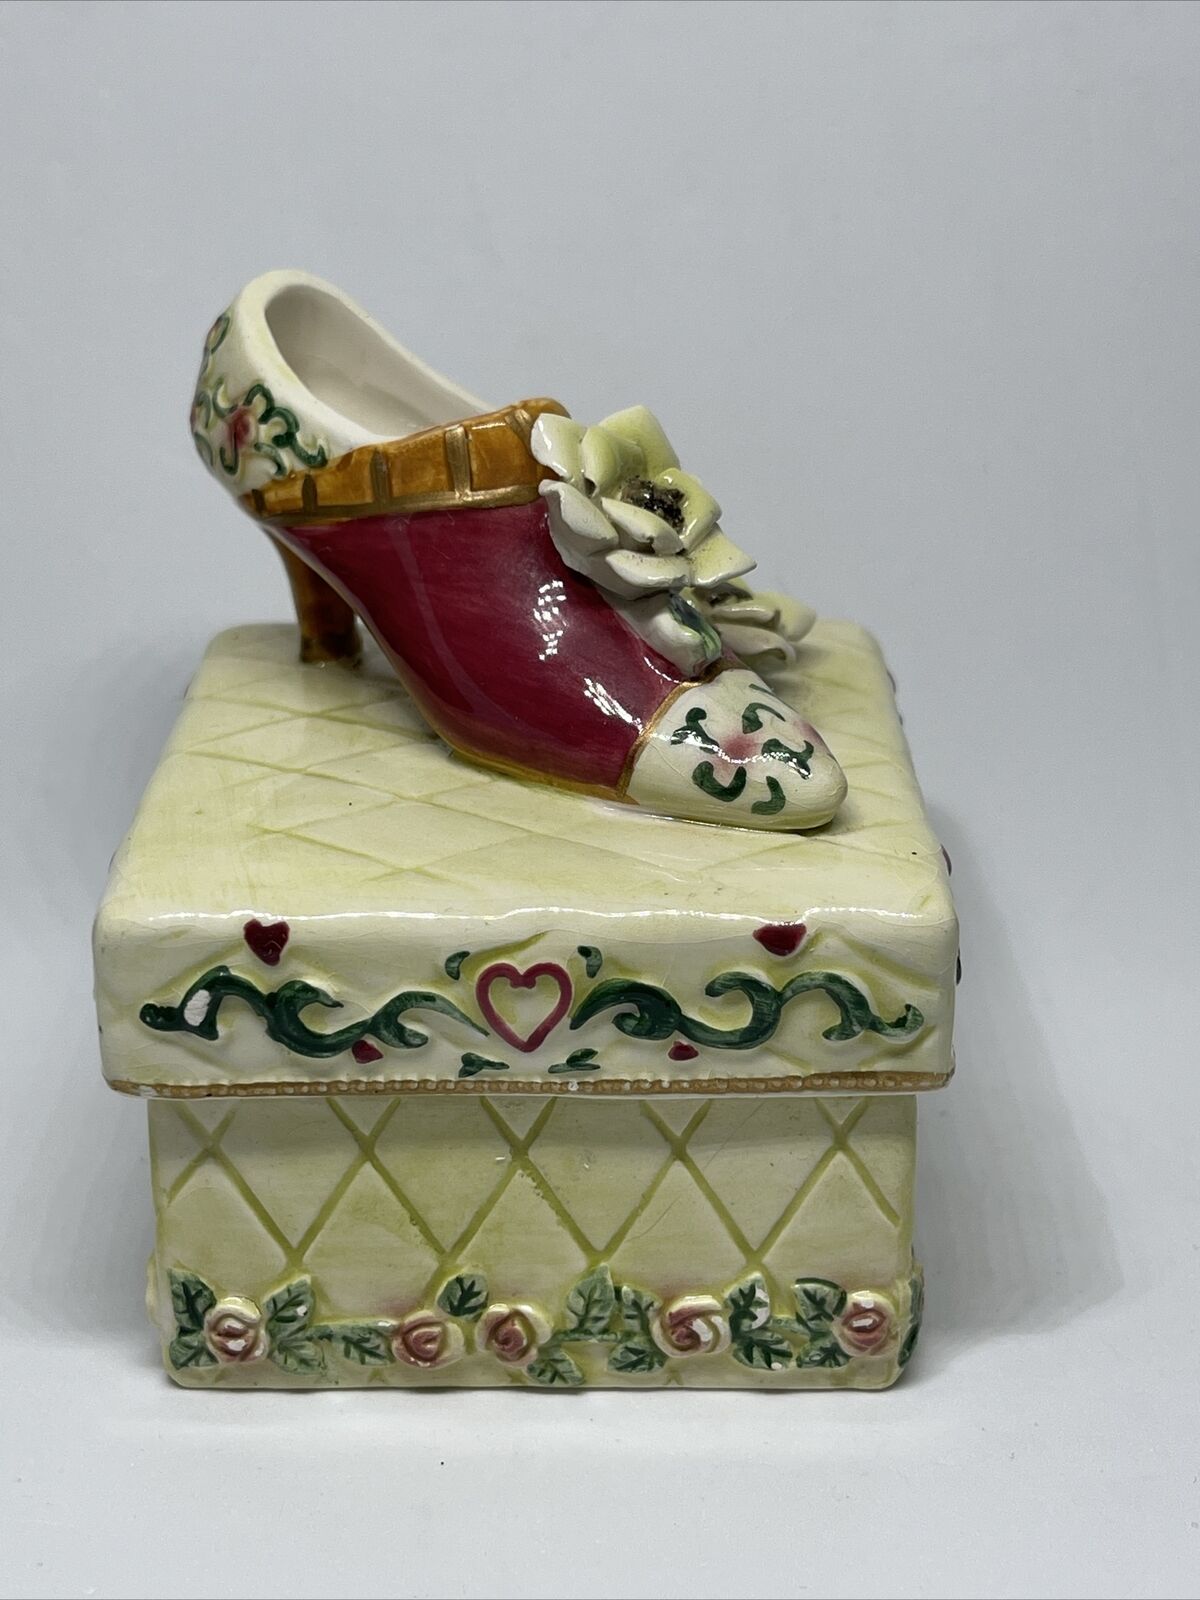 Lovely Vintage Porcelain Trinket Box with High-Heel Shoe, Flowers and Hearts 